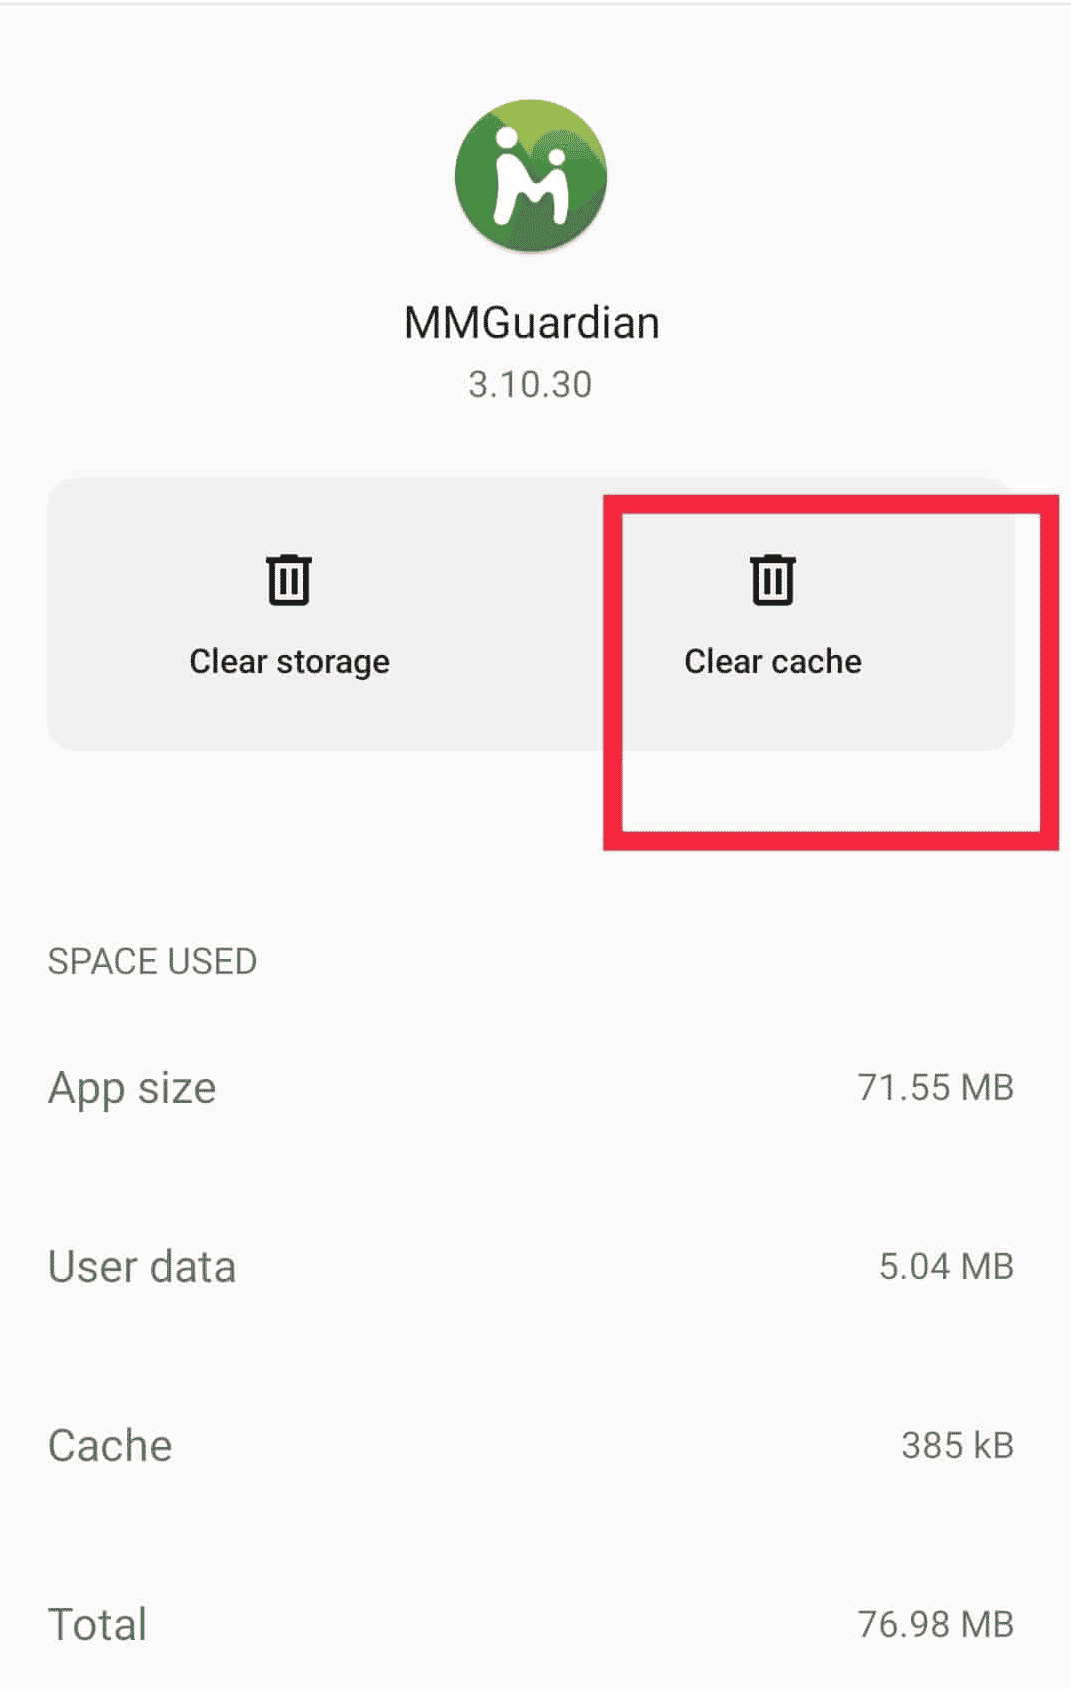 phone settings - Apps - MMGuardian - Clear cache | How to Disable MMGuardian without Parents Knowing